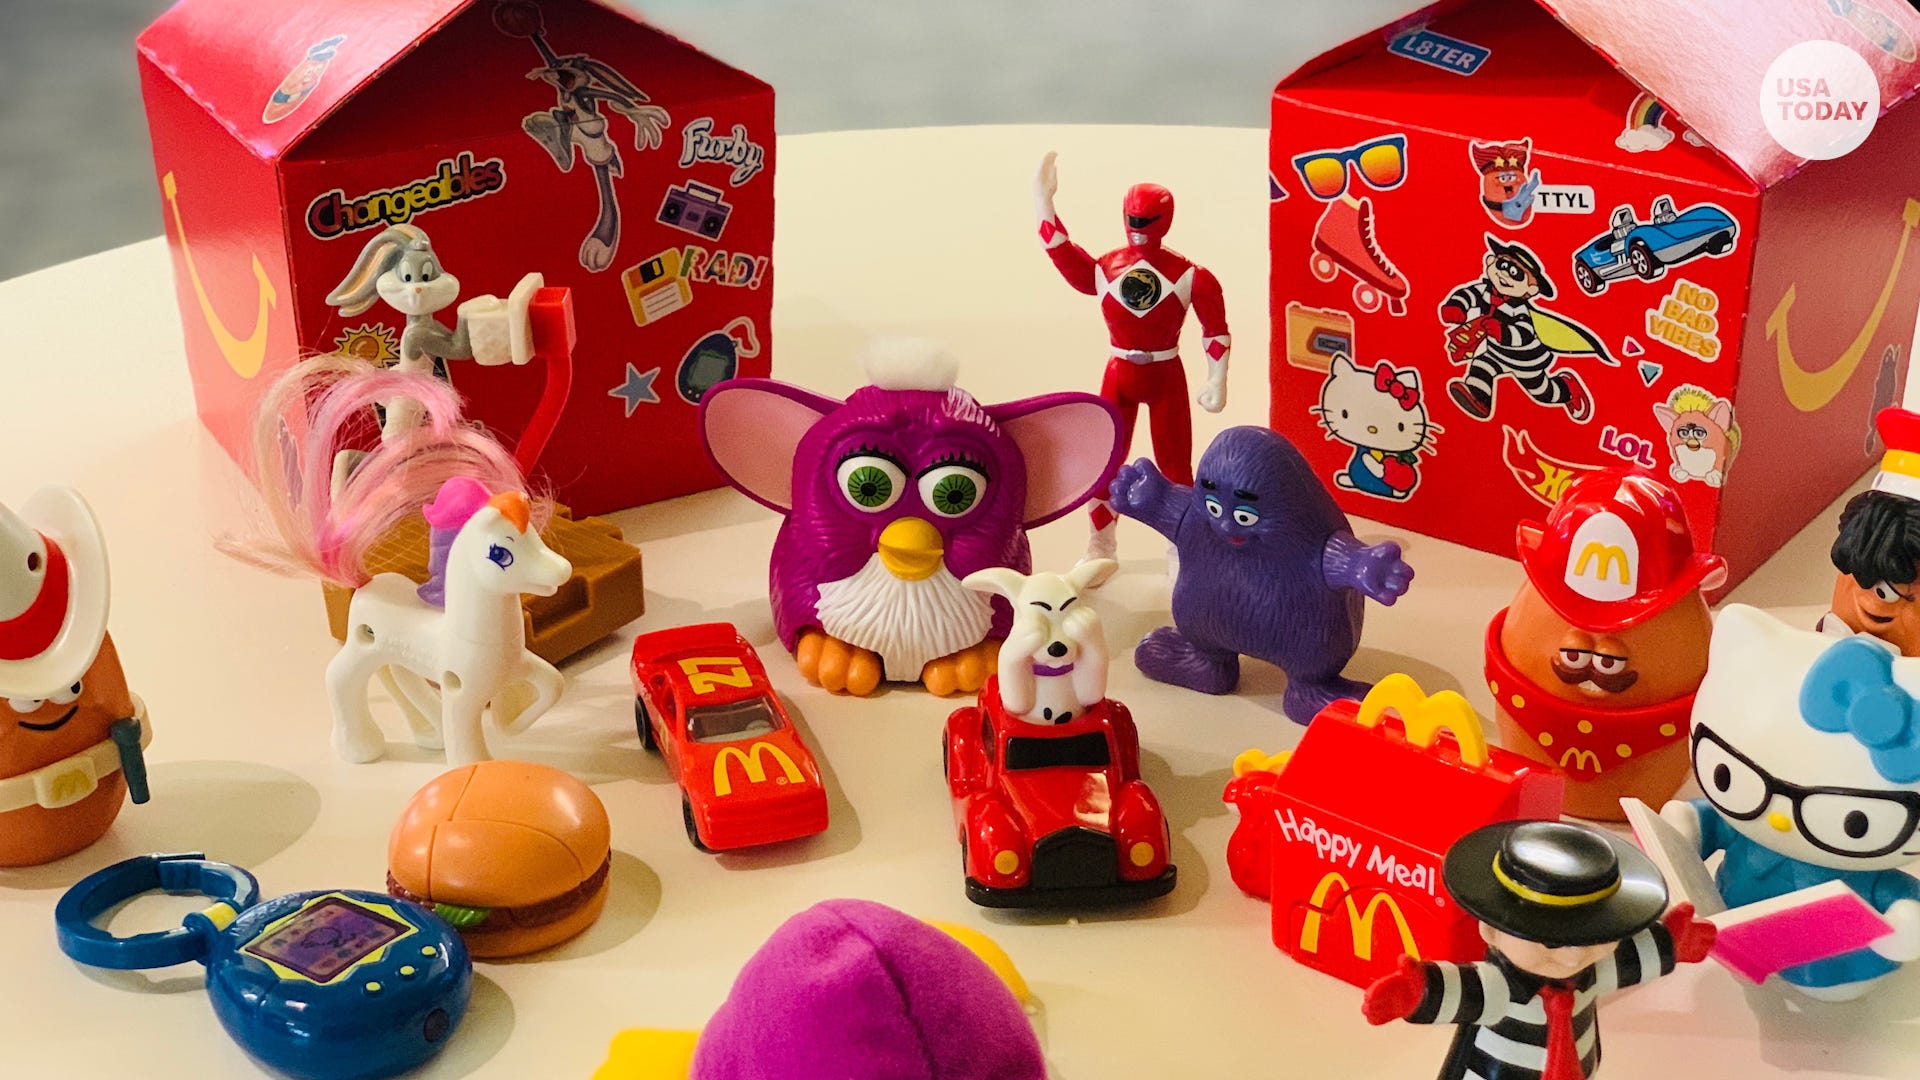 mcdo happy meal toy march 2019